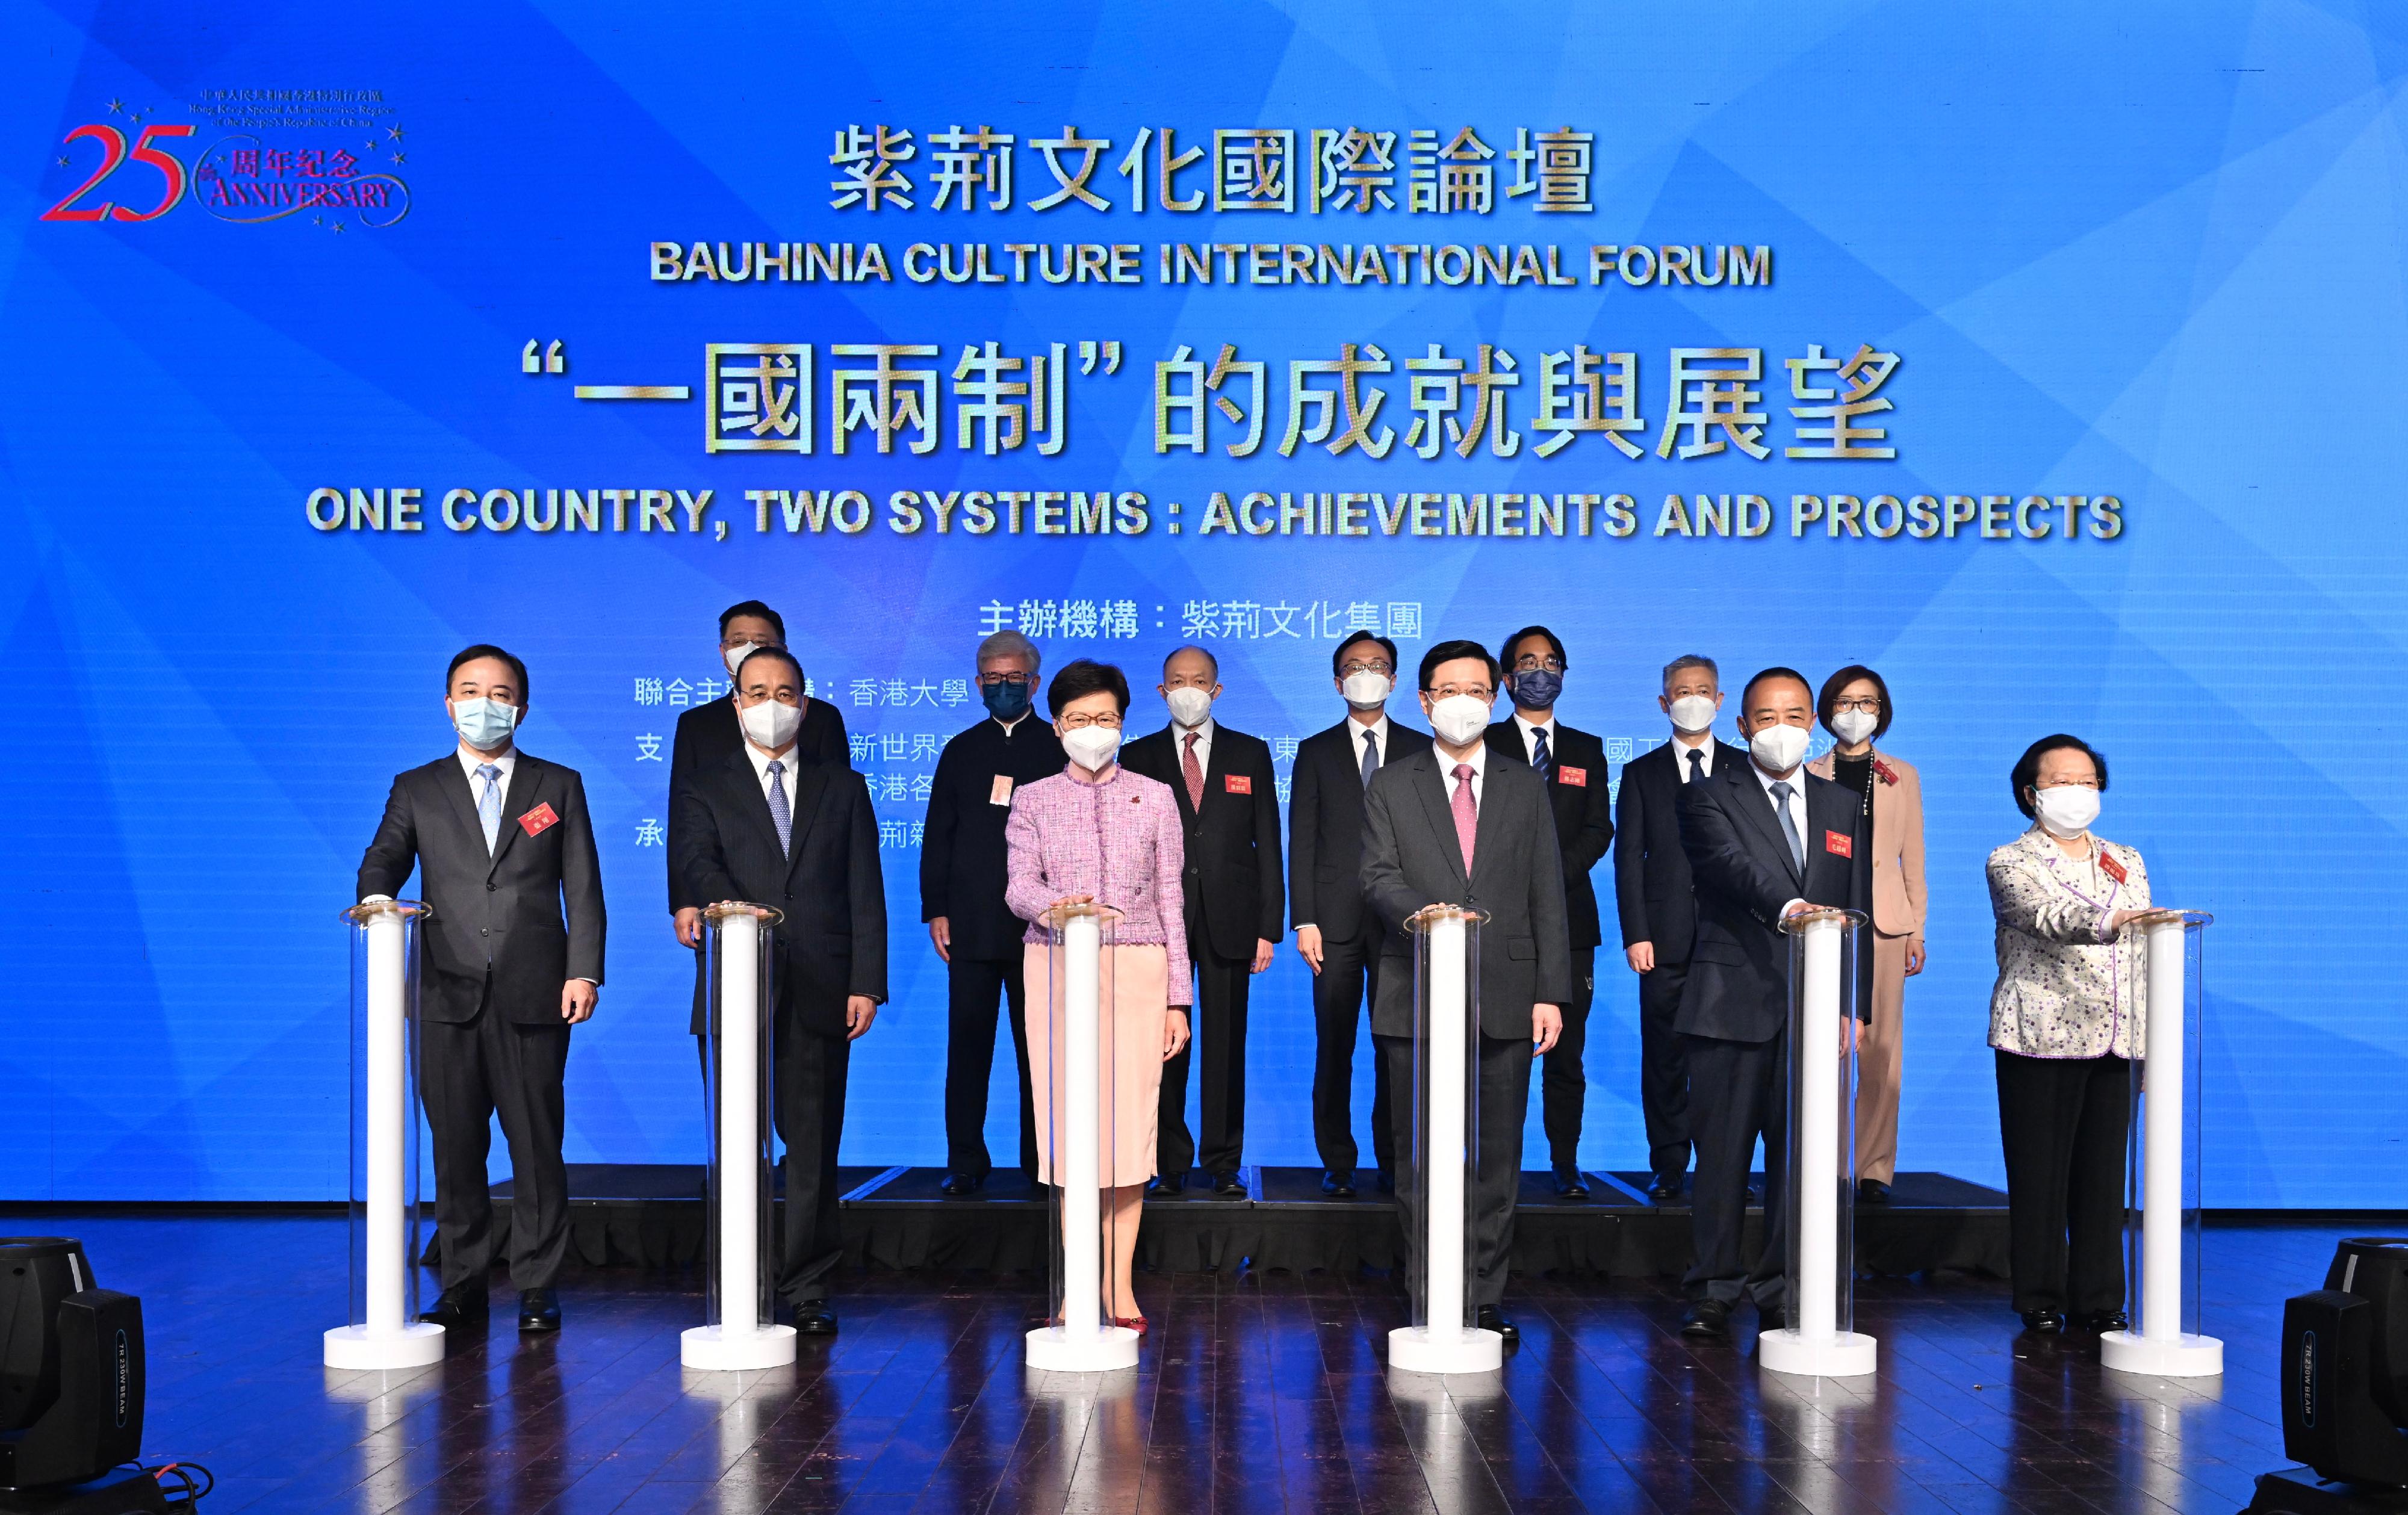 The Chief Executive, Mrs Carrie Lam, attended the Bauhinia Culture International Forum today (June 16). Photo shows (front row, from left) the President and Vice-Chancellor of the University of Hong Kong, Professor Zhang Xiang; the Commissioner of the Ministry of Foreign Affairs of the People's Republic of China in the Hong Kong Special Administrative Region (HKSAR), Mr Liu Guangyuan; Mrs Lam; the Chief Executive-elect, Mr John Lee; the Chairman of Bauhinia Culture Holdings Limited, Mr Mao Chaofeng; Vice-Chairperson of the HKSAR Basic Law Committee of the Standing Committee of the National People's Congress Ms Maria Tam; and other guests officiating at the lighting ceremony.